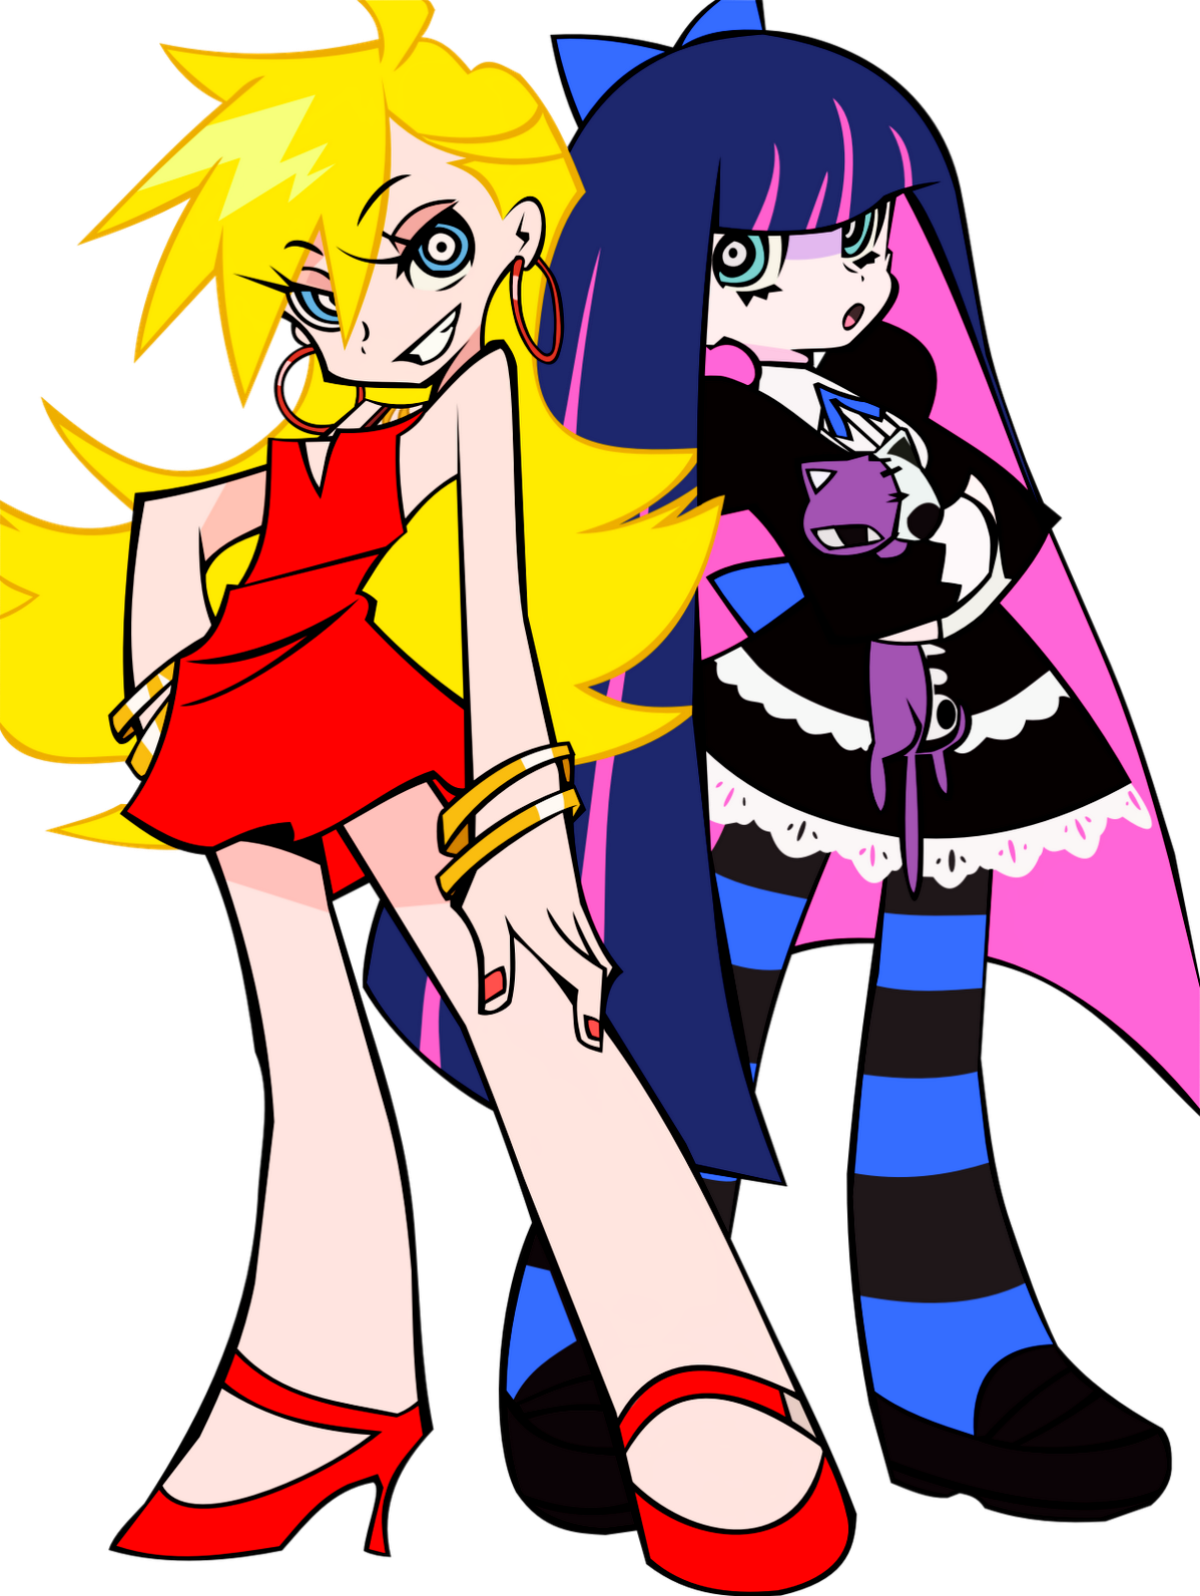 https://static.wikia.nocookie.net/p__/images/9/9e/Panty_%26_Stocking.png/revision/latest?cb=20230625045934&path-prefix=protagonist